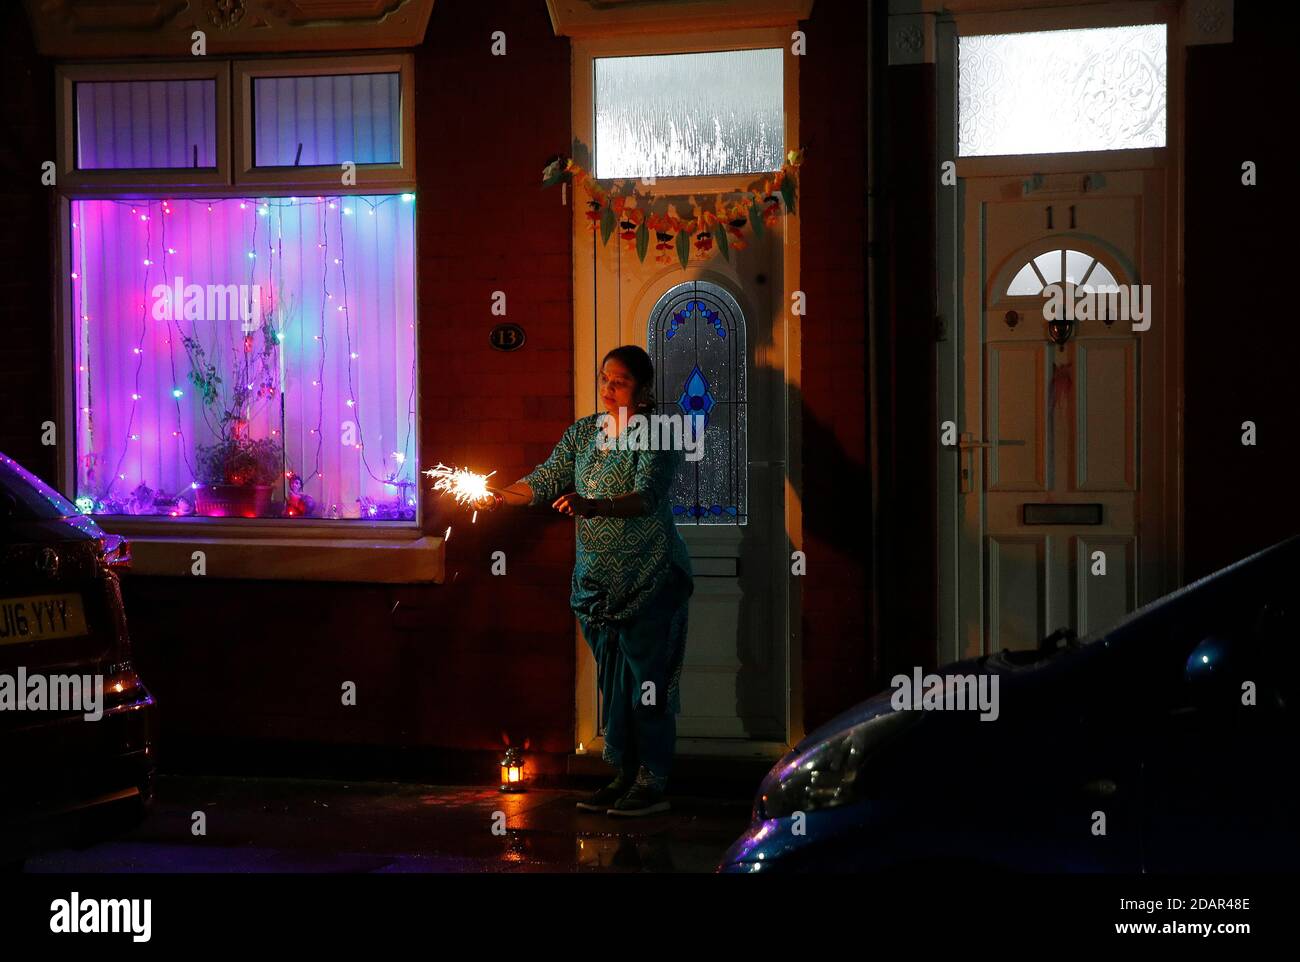 Leicester, Leicestershire, UK. 14th November 2020. A woman lights sparklers on her doorstep after Covid-19 restrictions meant the usual Diwali day ceremony and celebrations were cancelled this year. Credit Darren Staples/Alamy Live News. Stock Photo